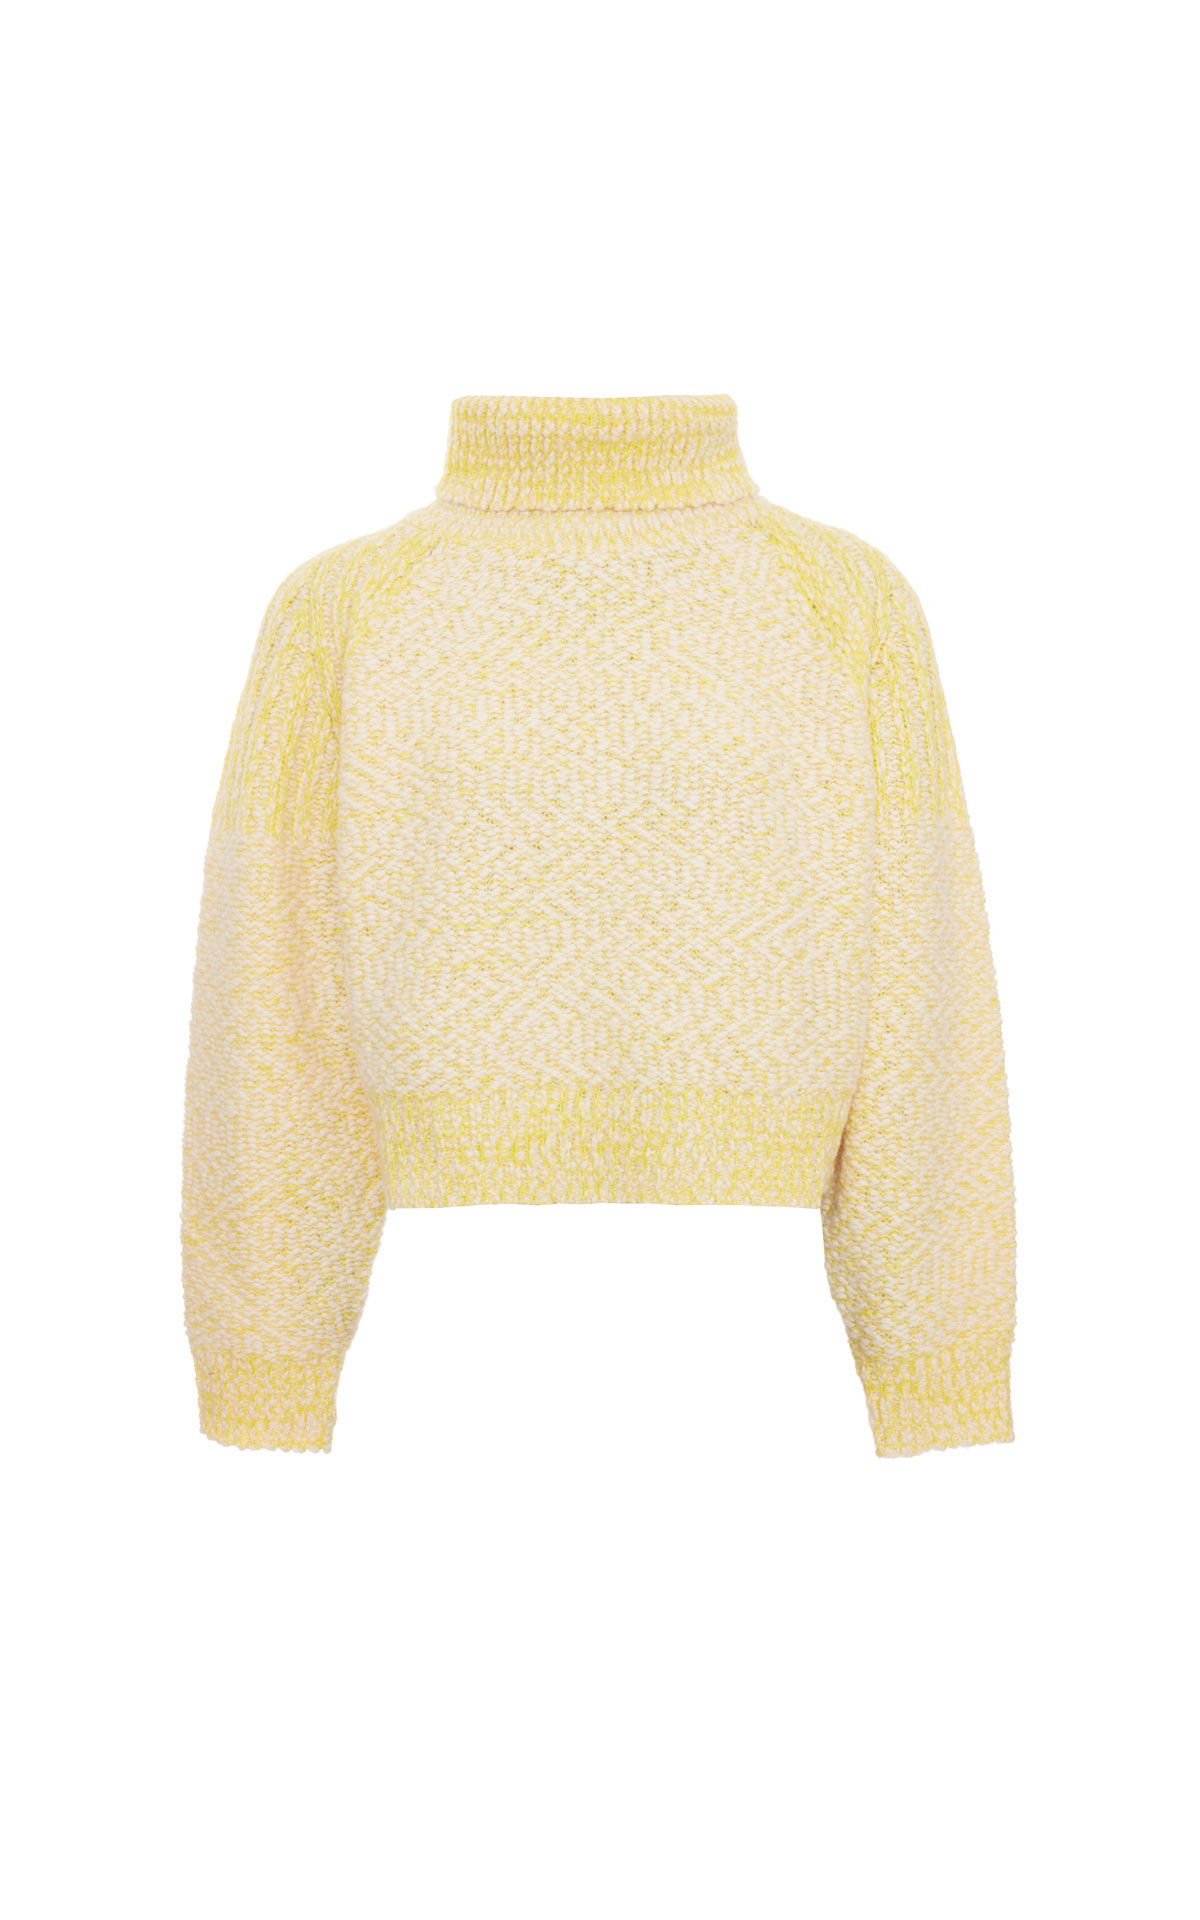 Kenzo Yellow jumper from Bicester Village